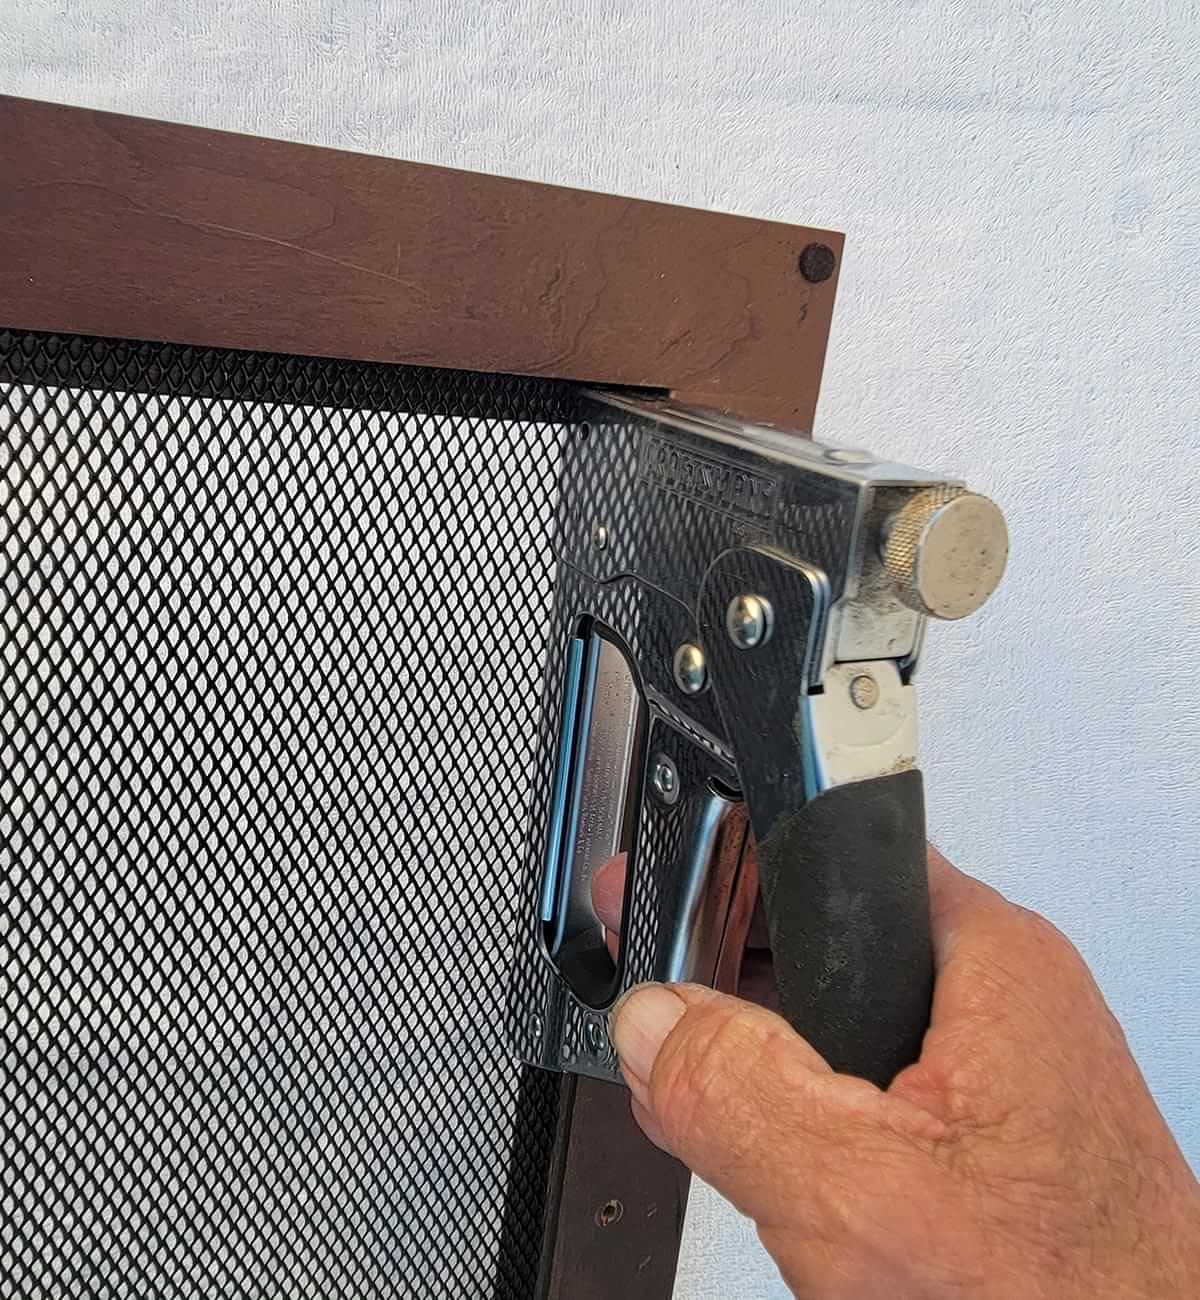 with a strong staple gun, the aluminum mesh screen is affixed to the inside of the compartment door